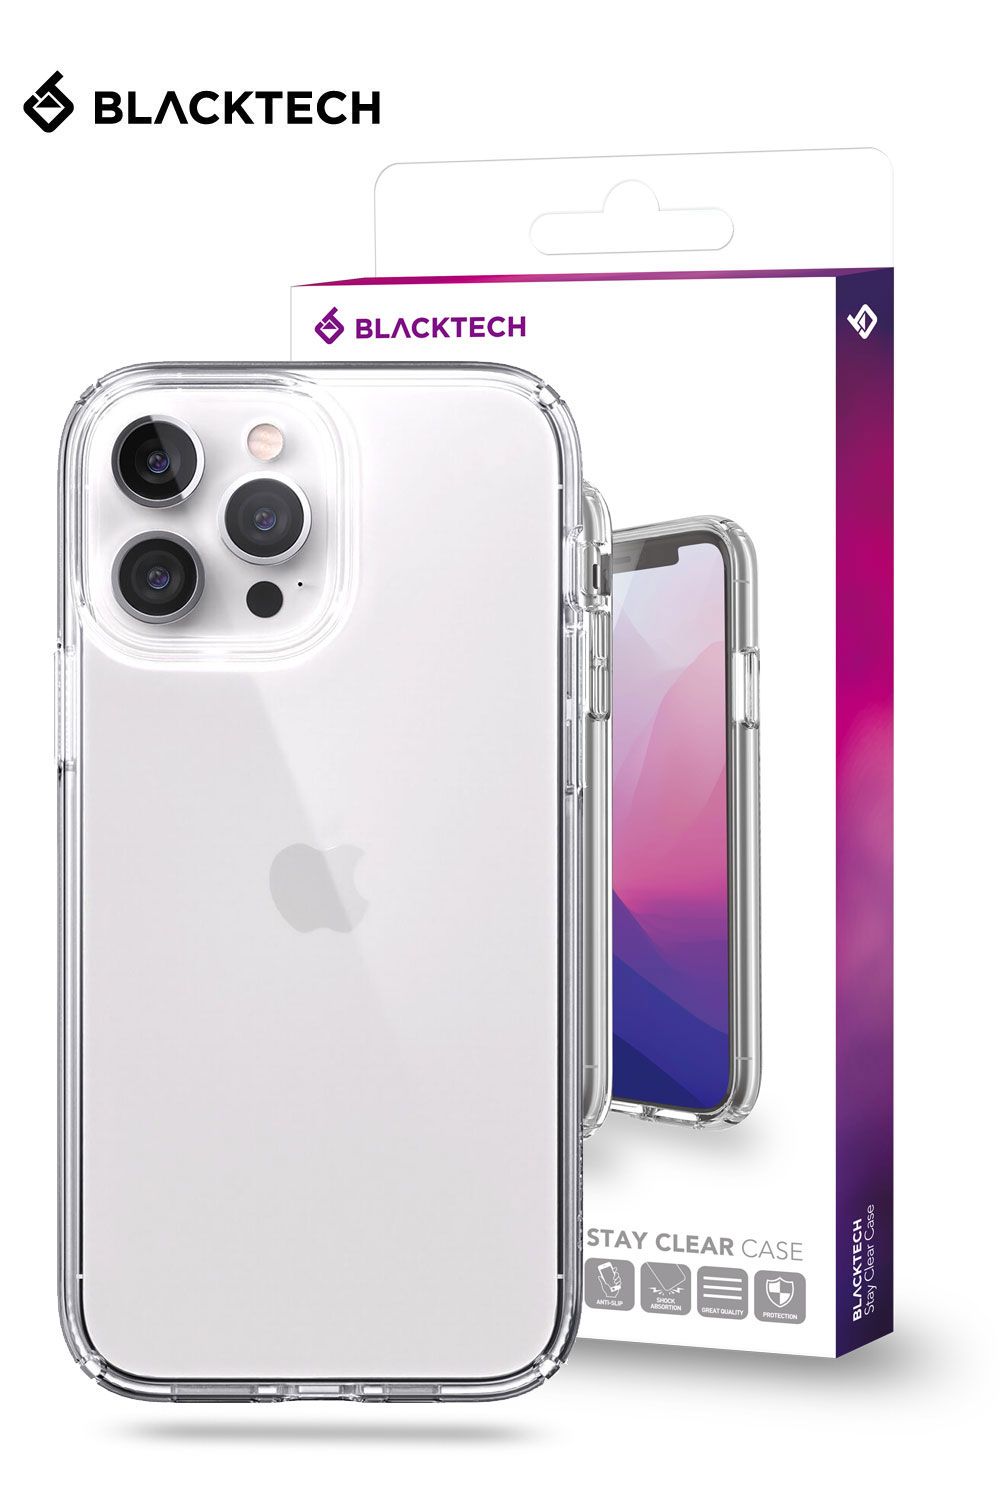 iPhone 12 Mini 5.4inch BLACKTECH Stay Clear Case - Clear